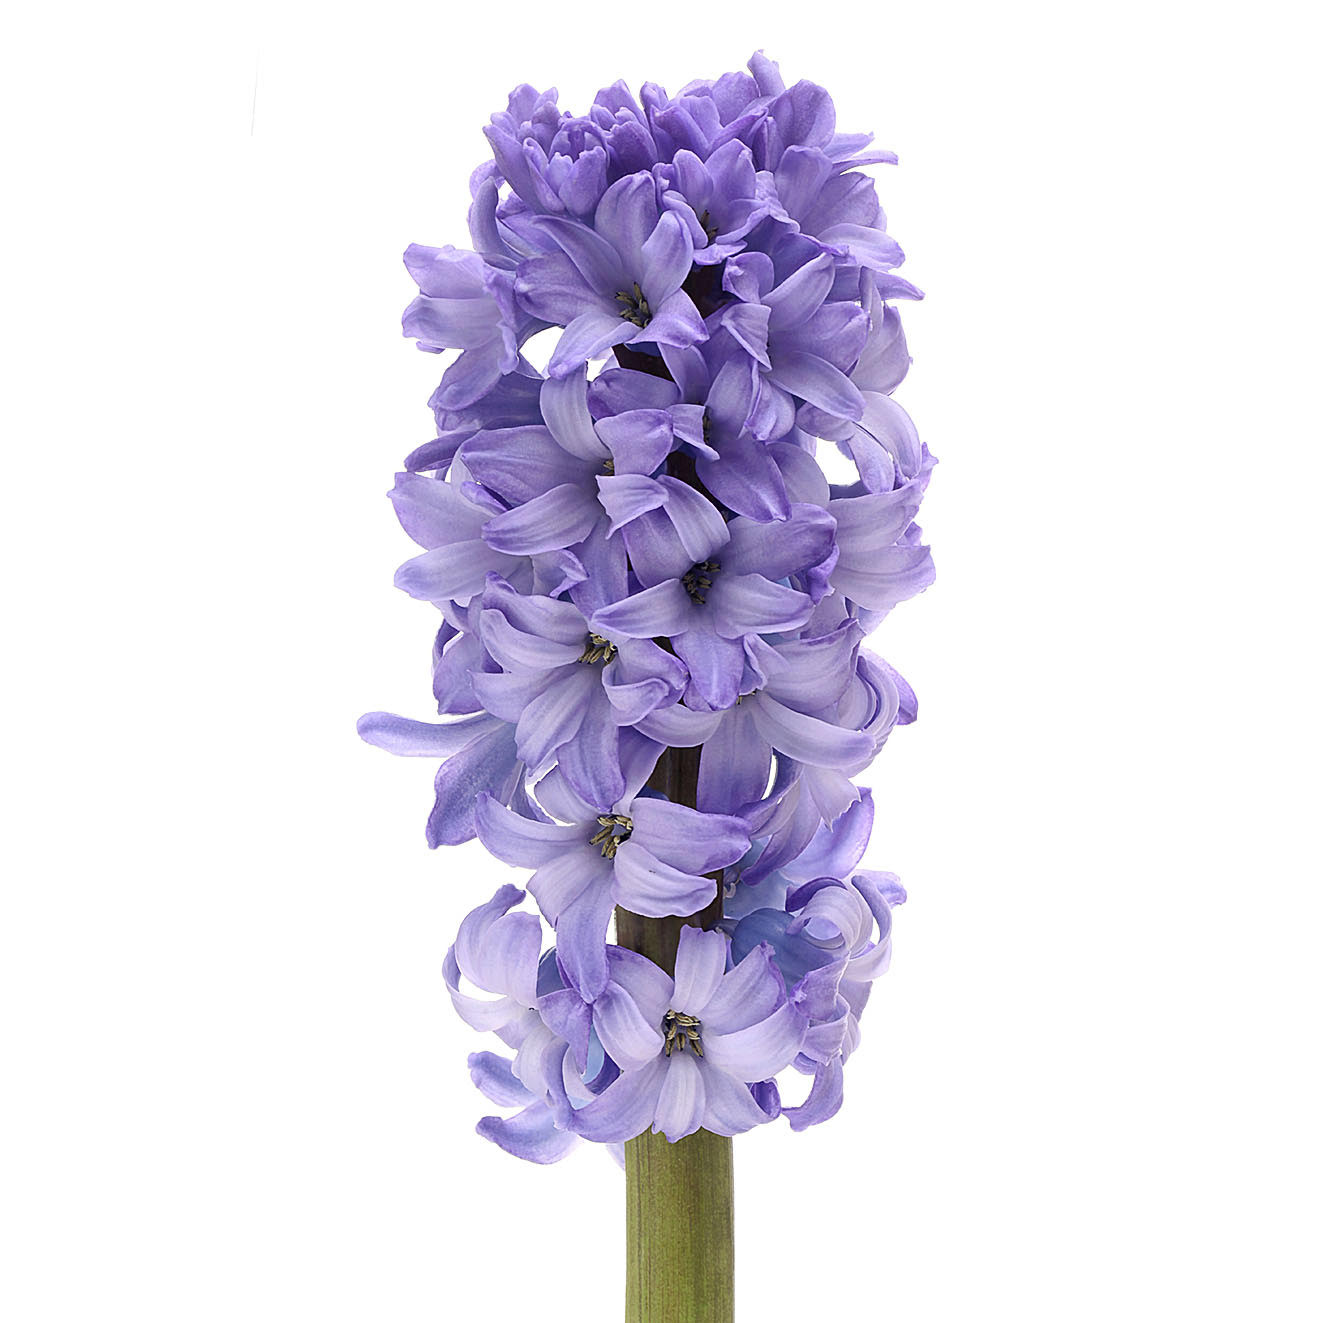 The Colorful Hyacinth and Its Rich Backstory003